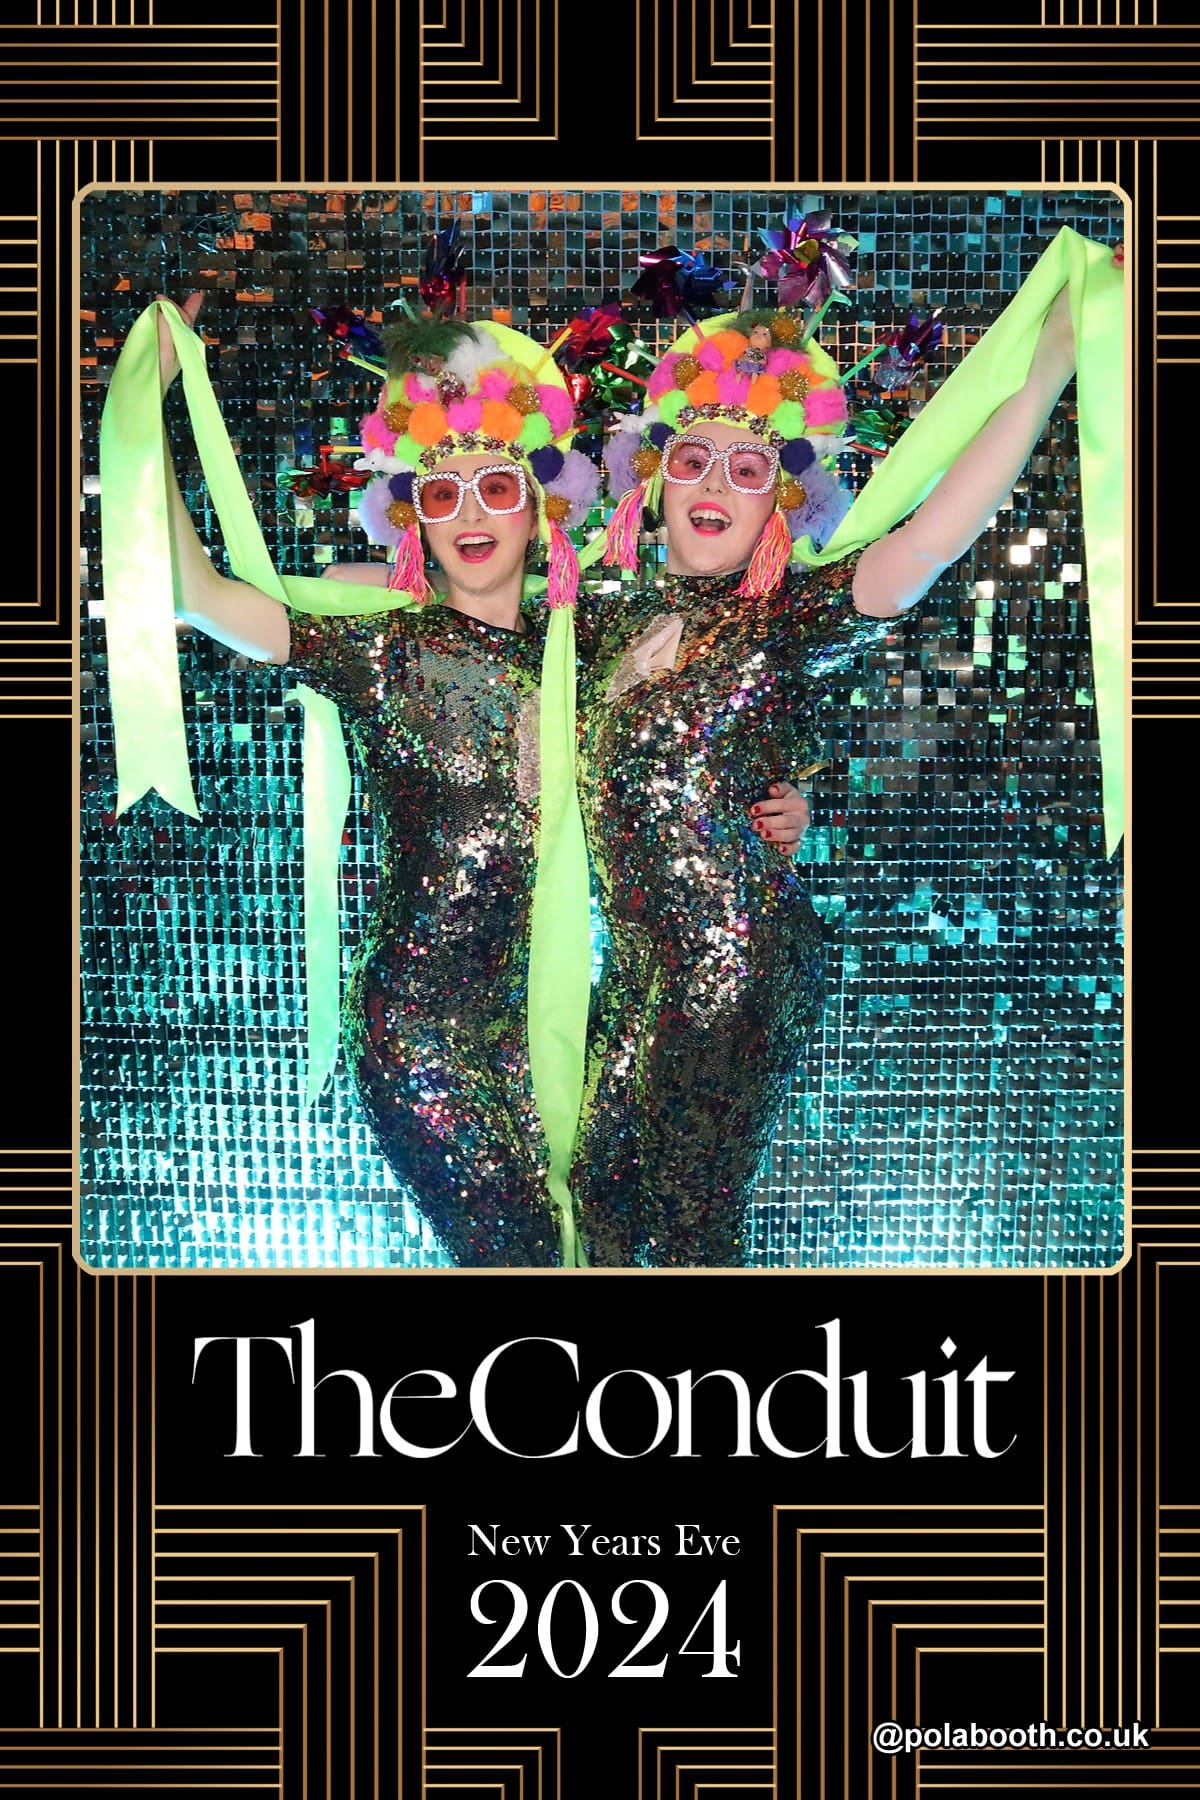 The Conduit NYE 2024- Covent Garden Photo booth hire